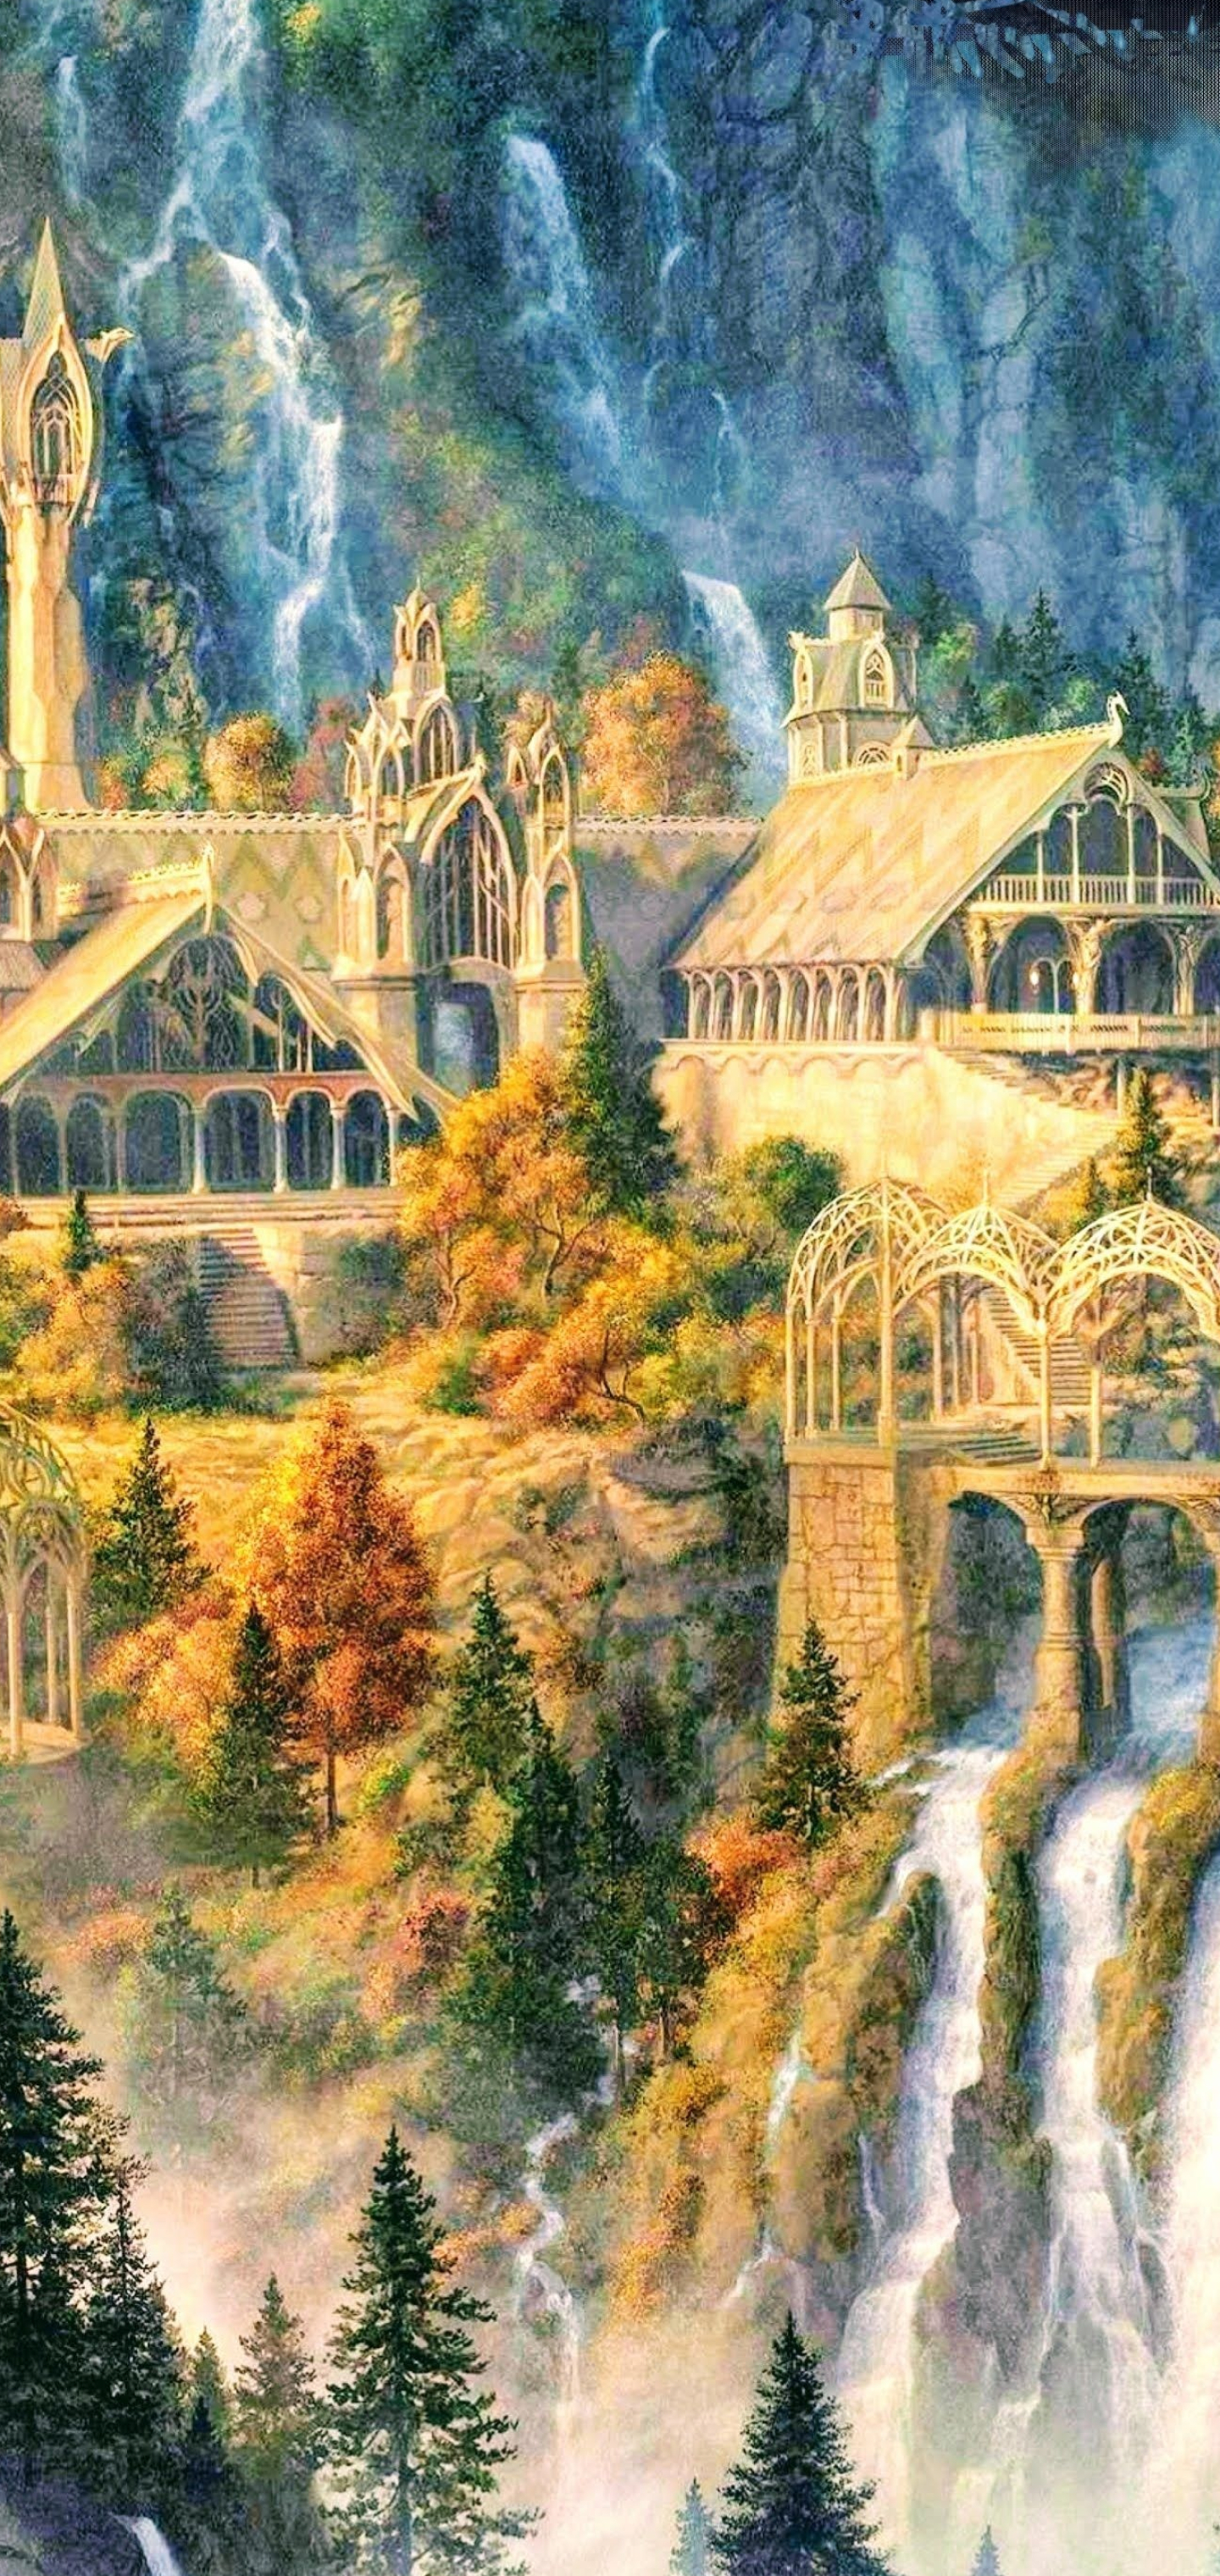 Rivendell, Bear Cave wallpapers, Middle-earth, Lord of the Rings, 1440x3040 HD Phone